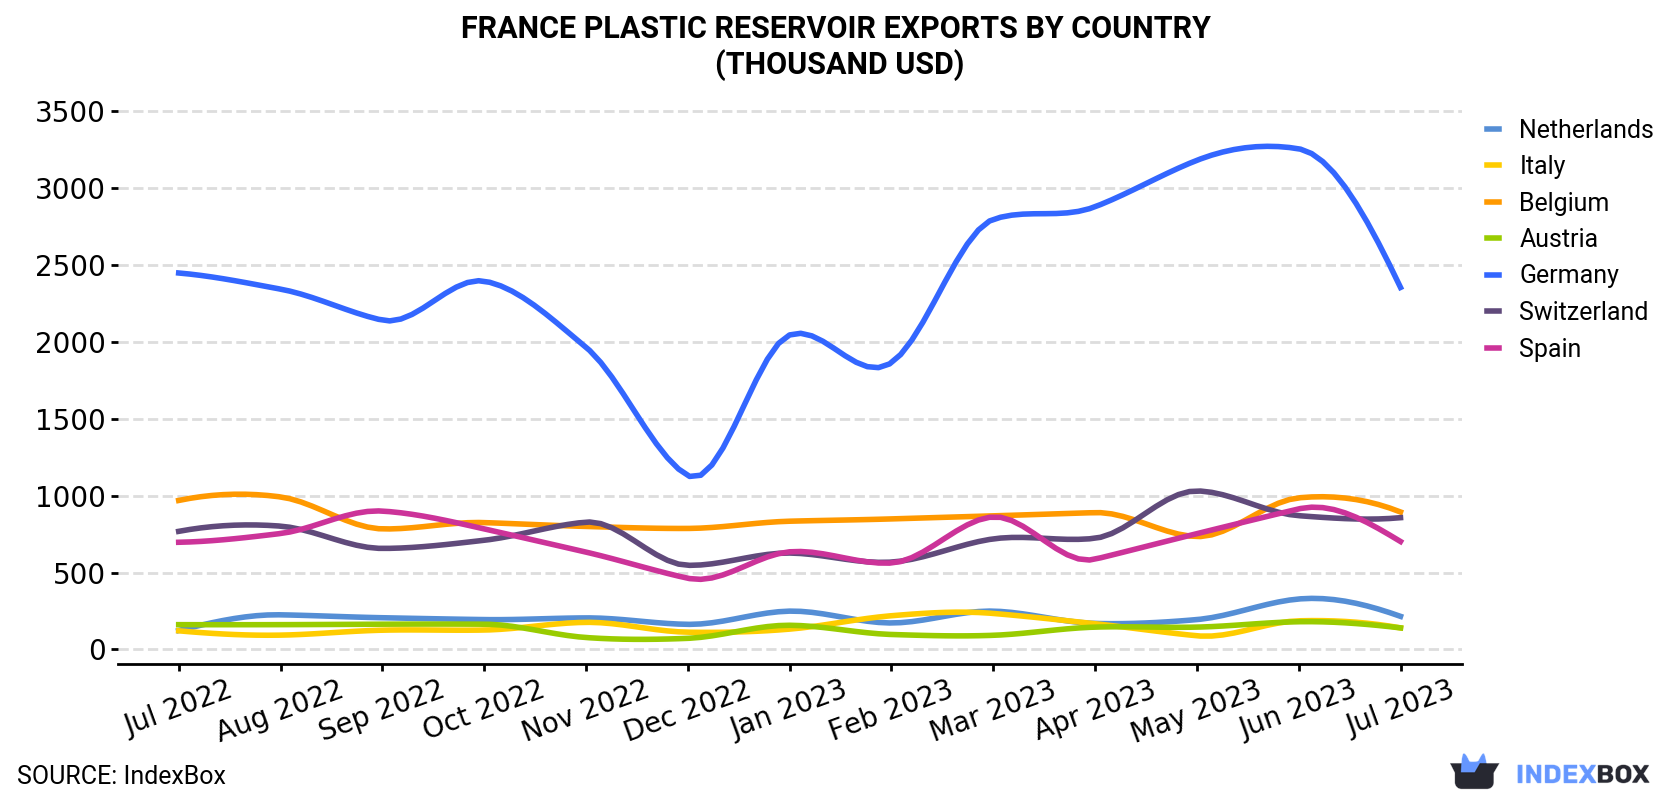 France Plastic Reservoir Exports By Country (Thousand USD)